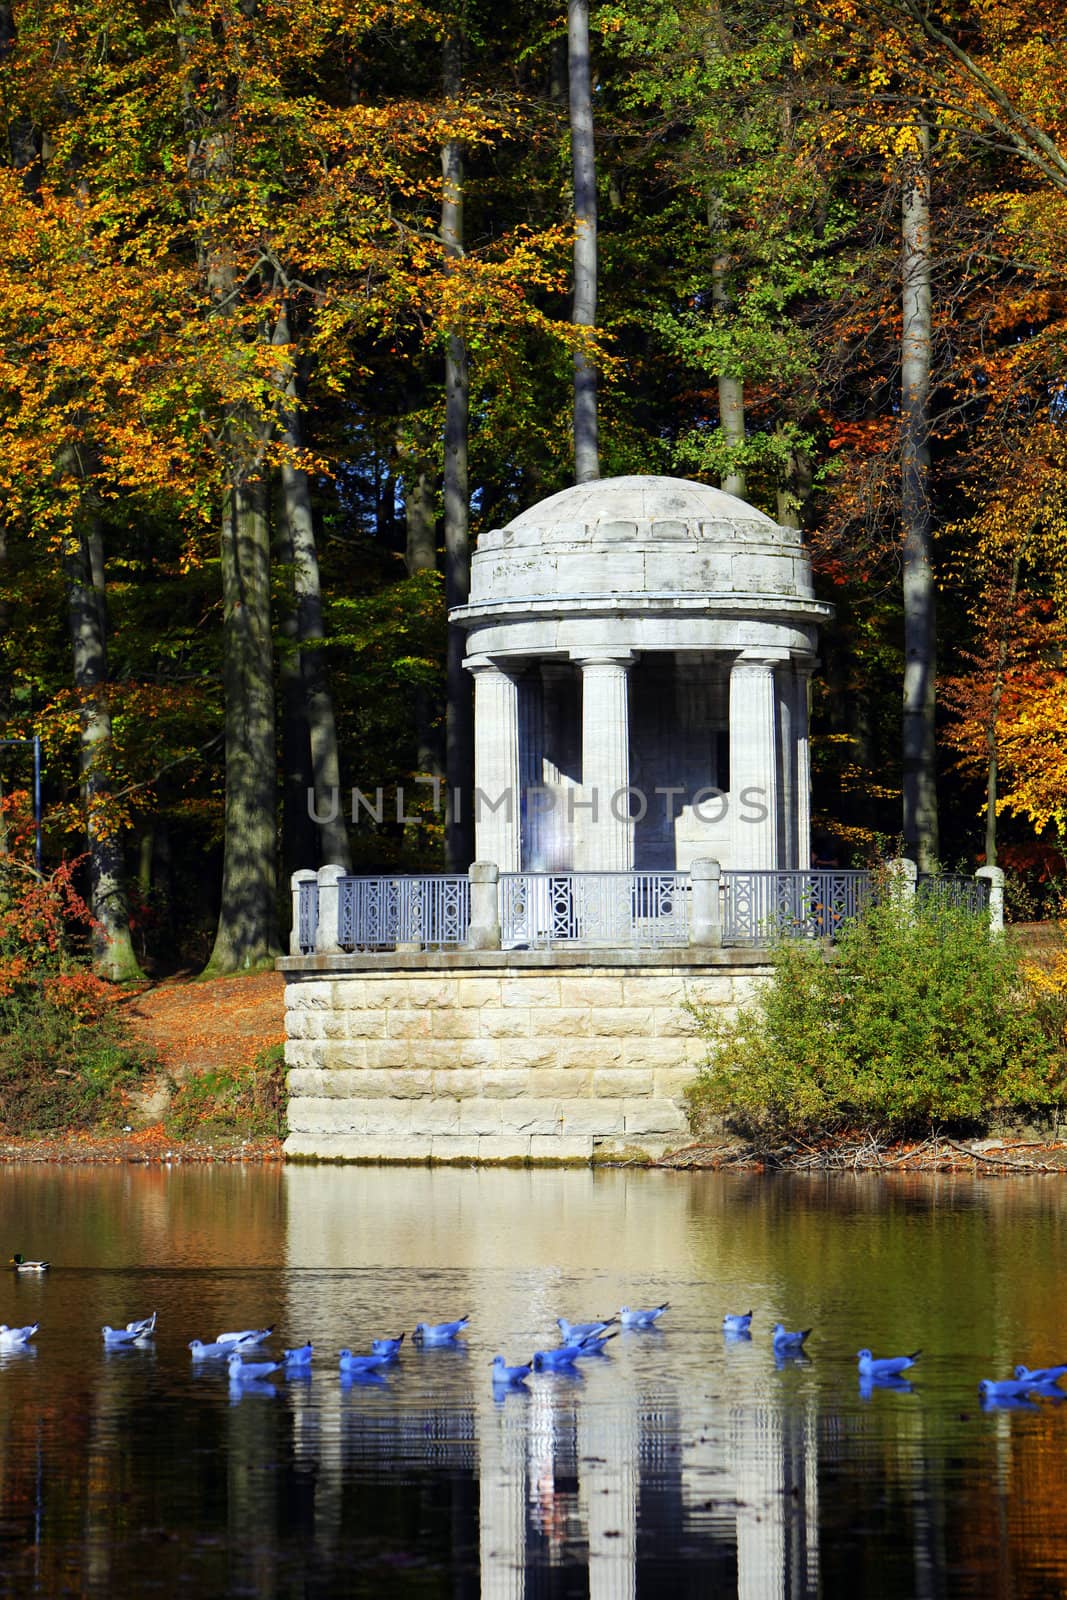 Lakeside gazebo or pavilion reflected in the tranquil water backed by colourful autumn trees